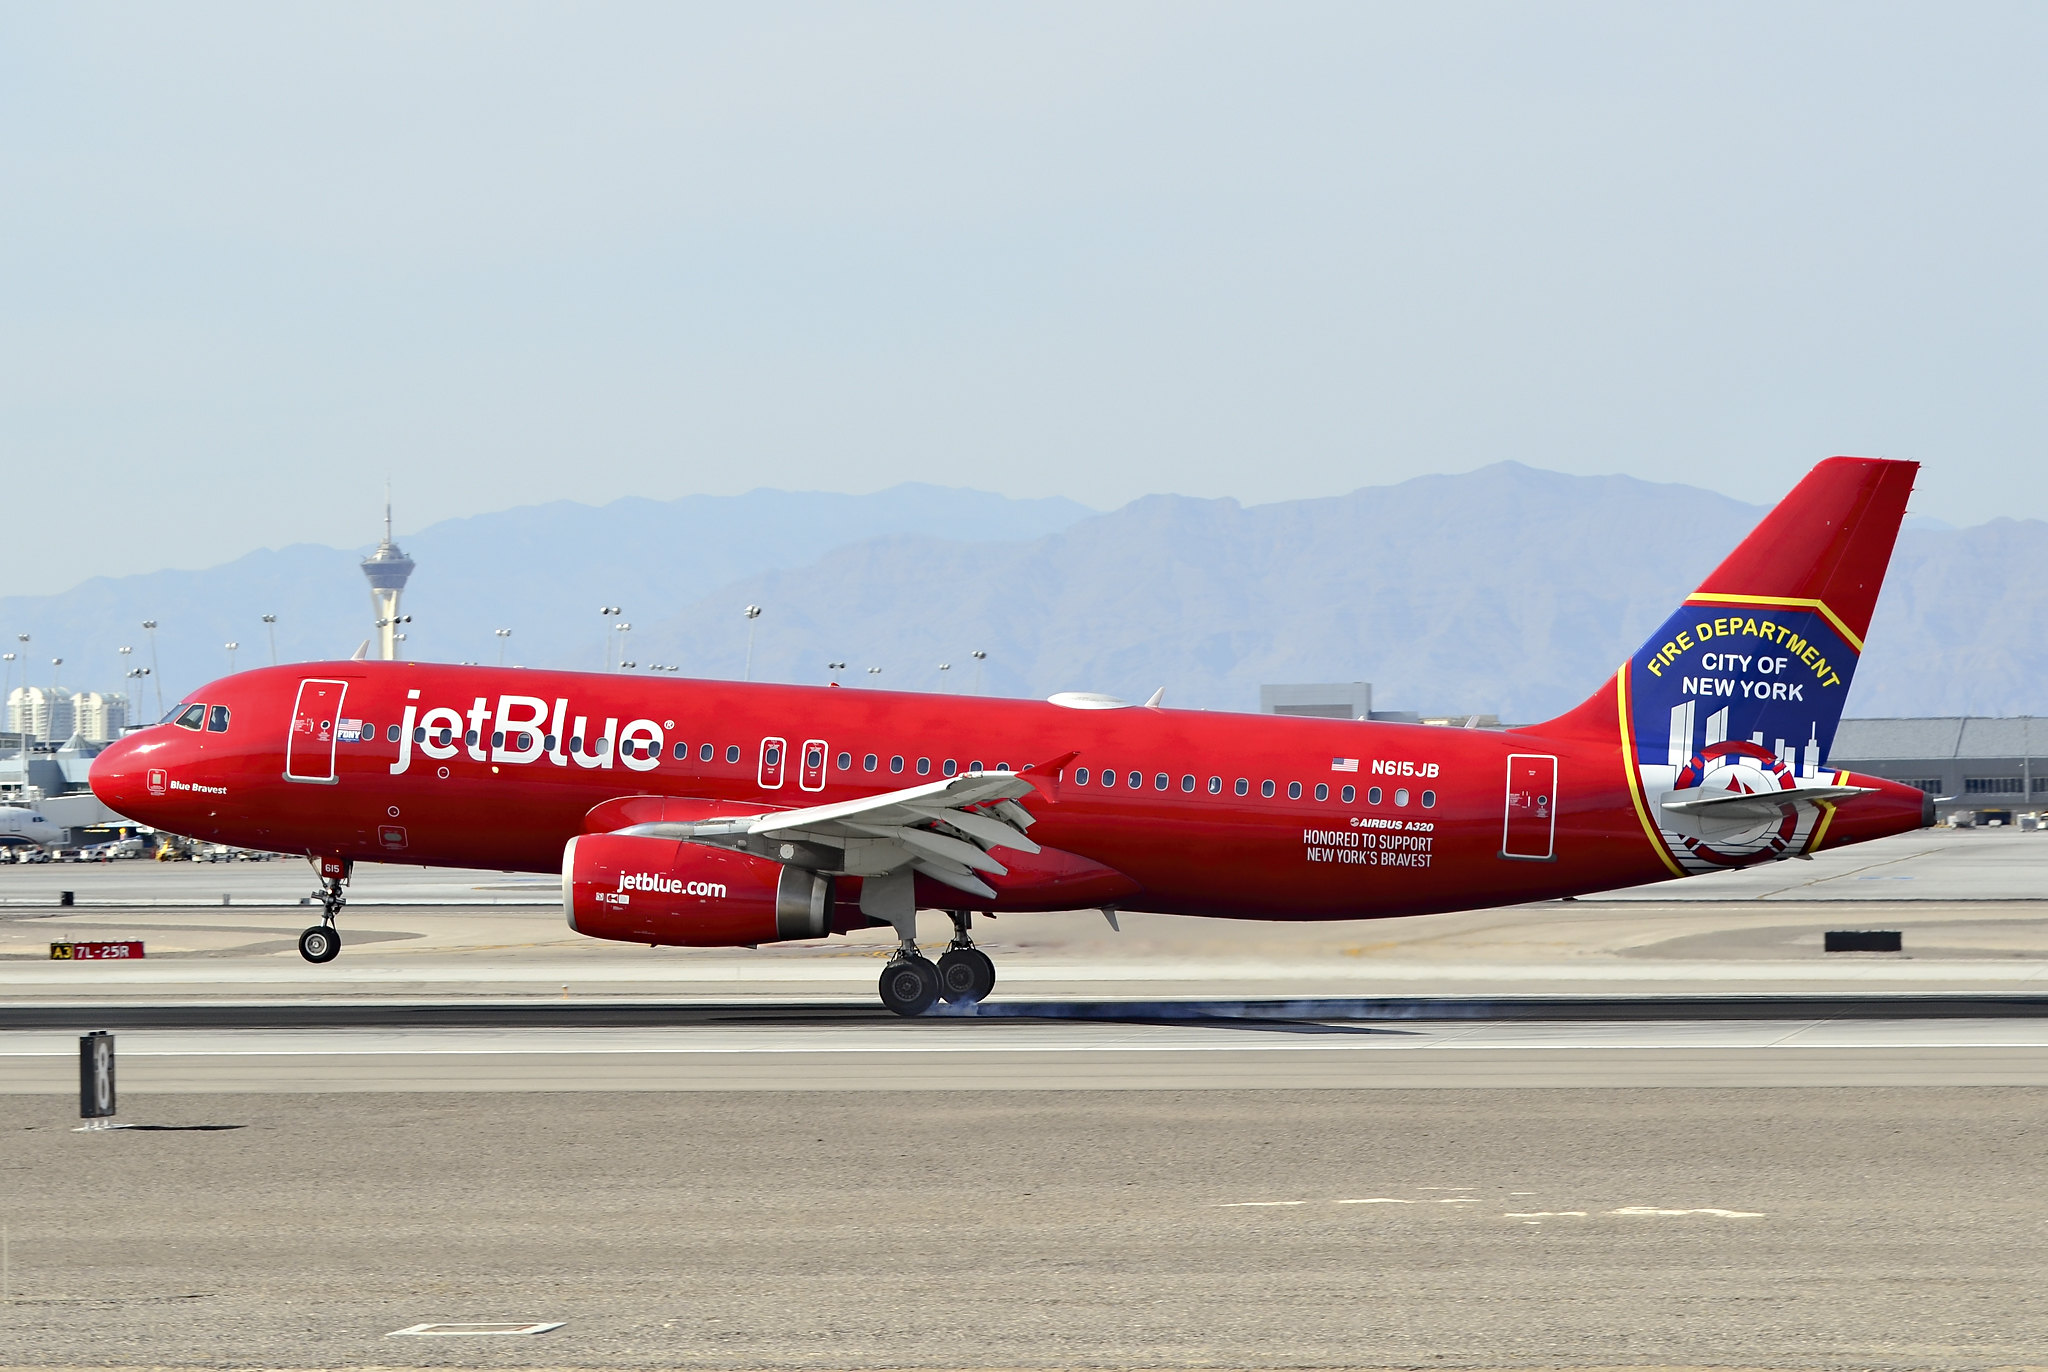 How JetBlue Paid Tribute To Fallen Crew Members Live and Let's Fly